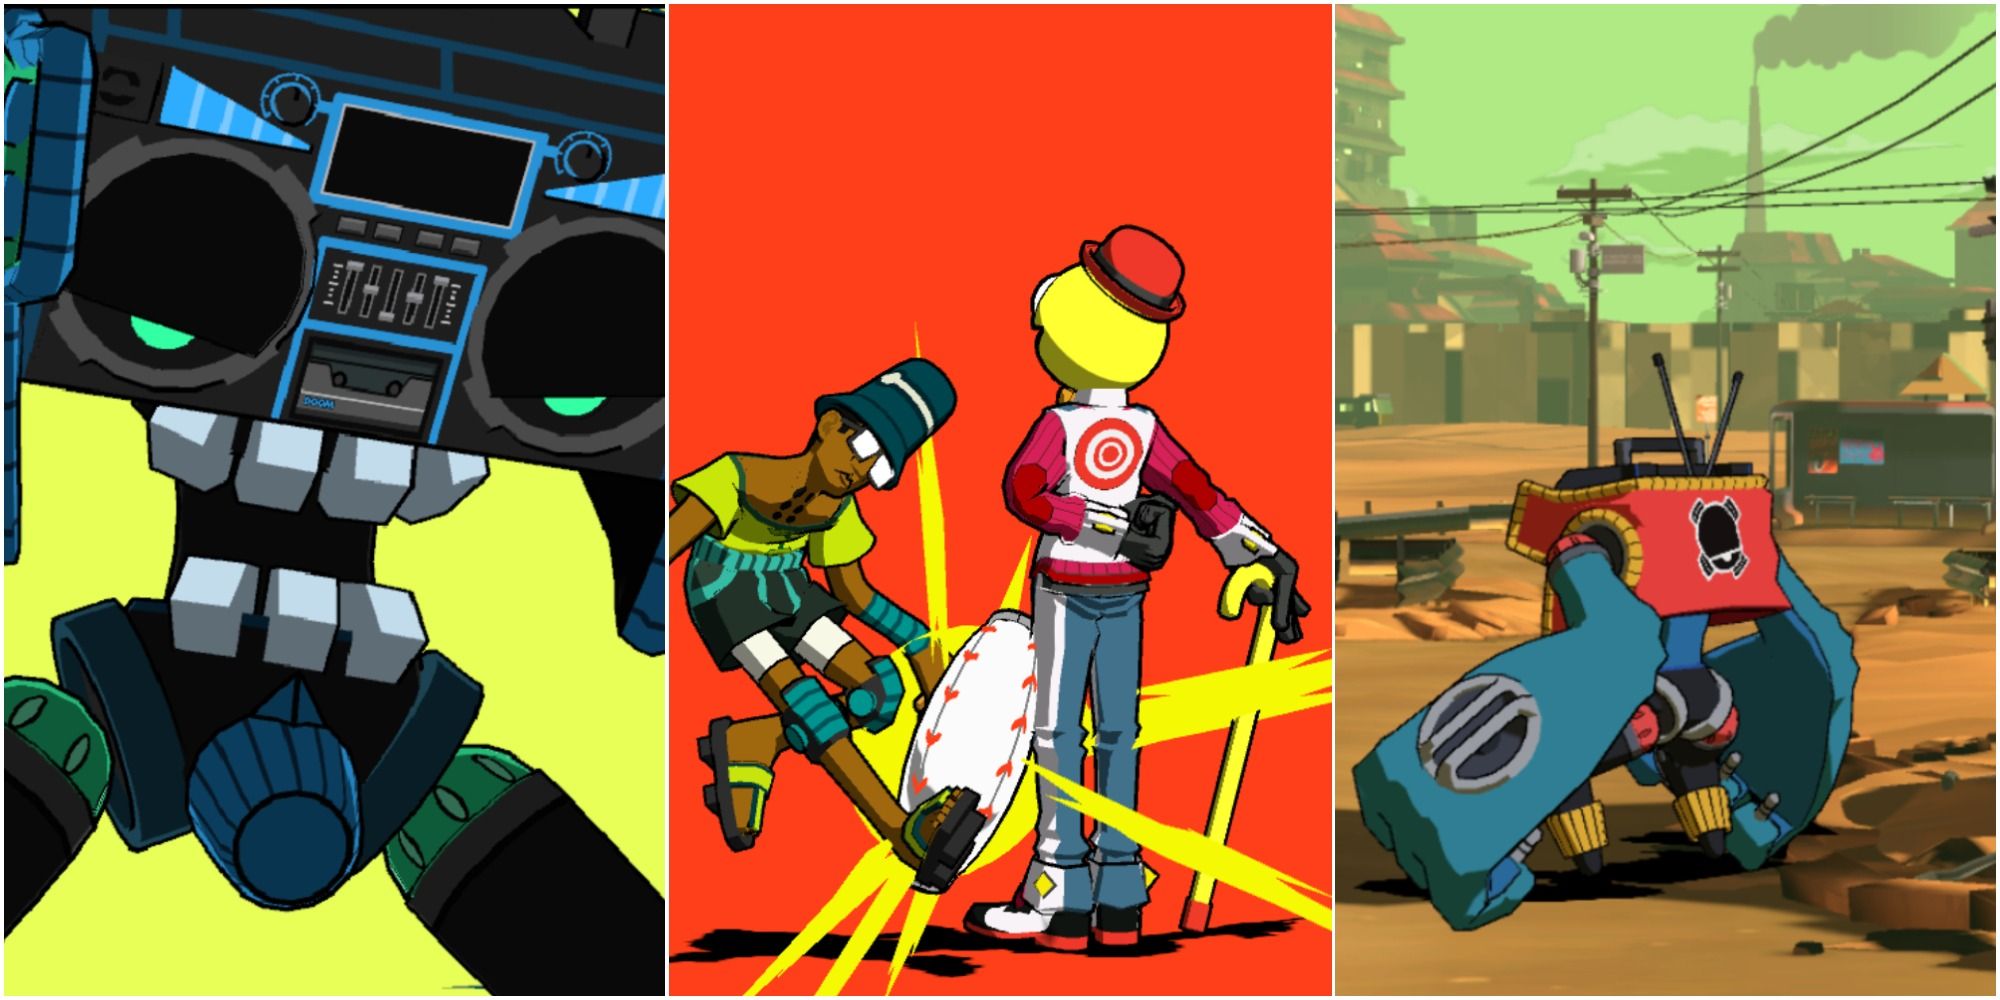 Lethal League Blaze on the left a close up of Doombox, in the middle Candyman and Dice and on the right a mid shot of Doombox from the side